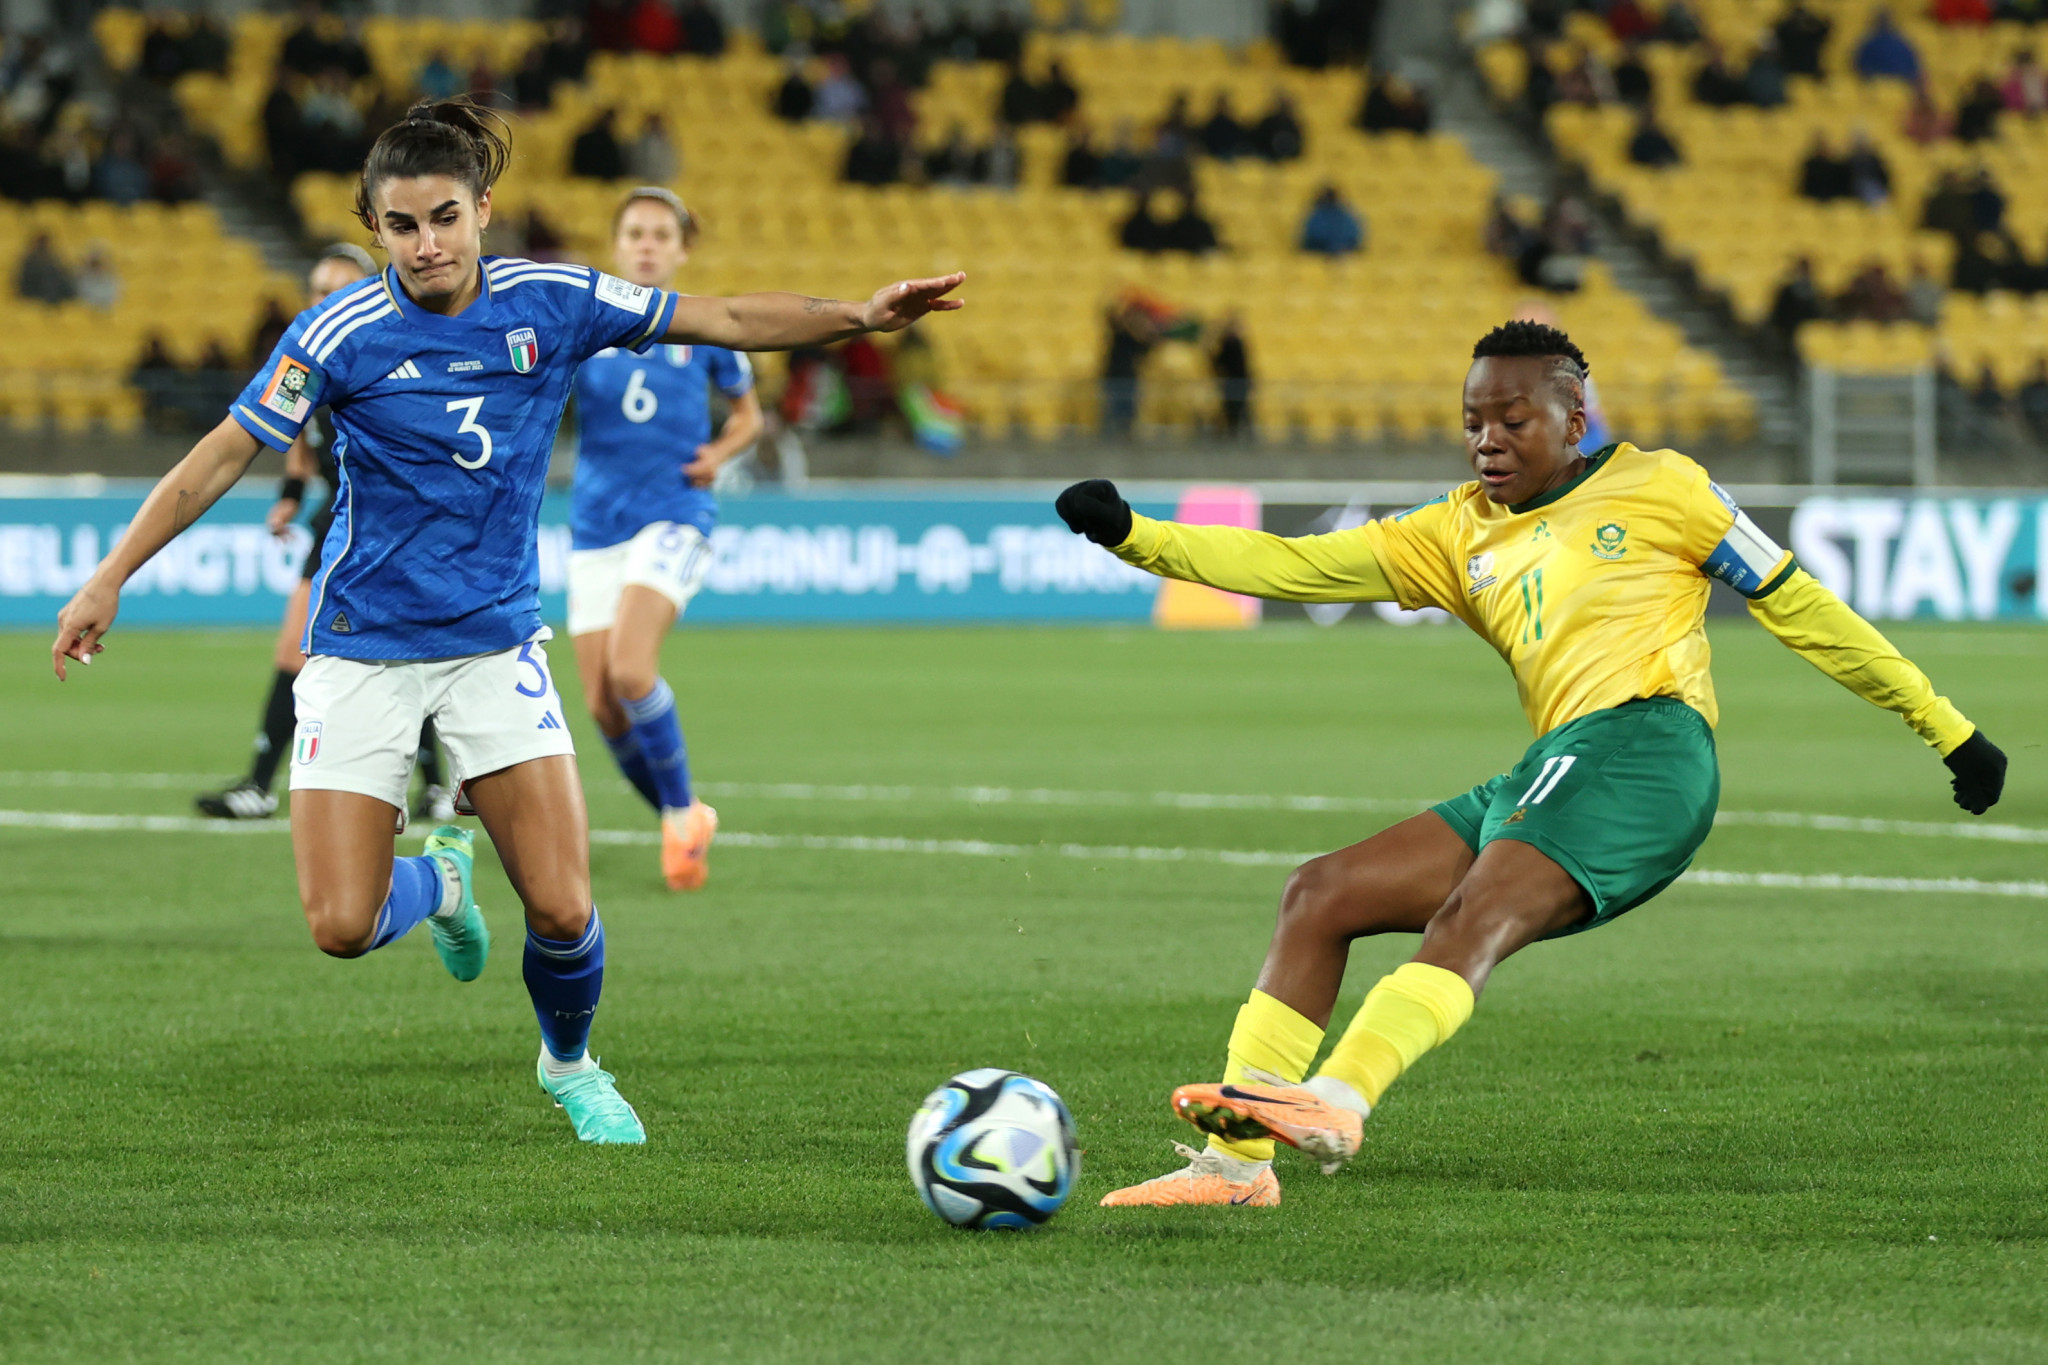 Thembi Kgatlana's stoppage-time winner for South Africa saw them reach the last 16 after a dramatic win over Italy ©Getty Images